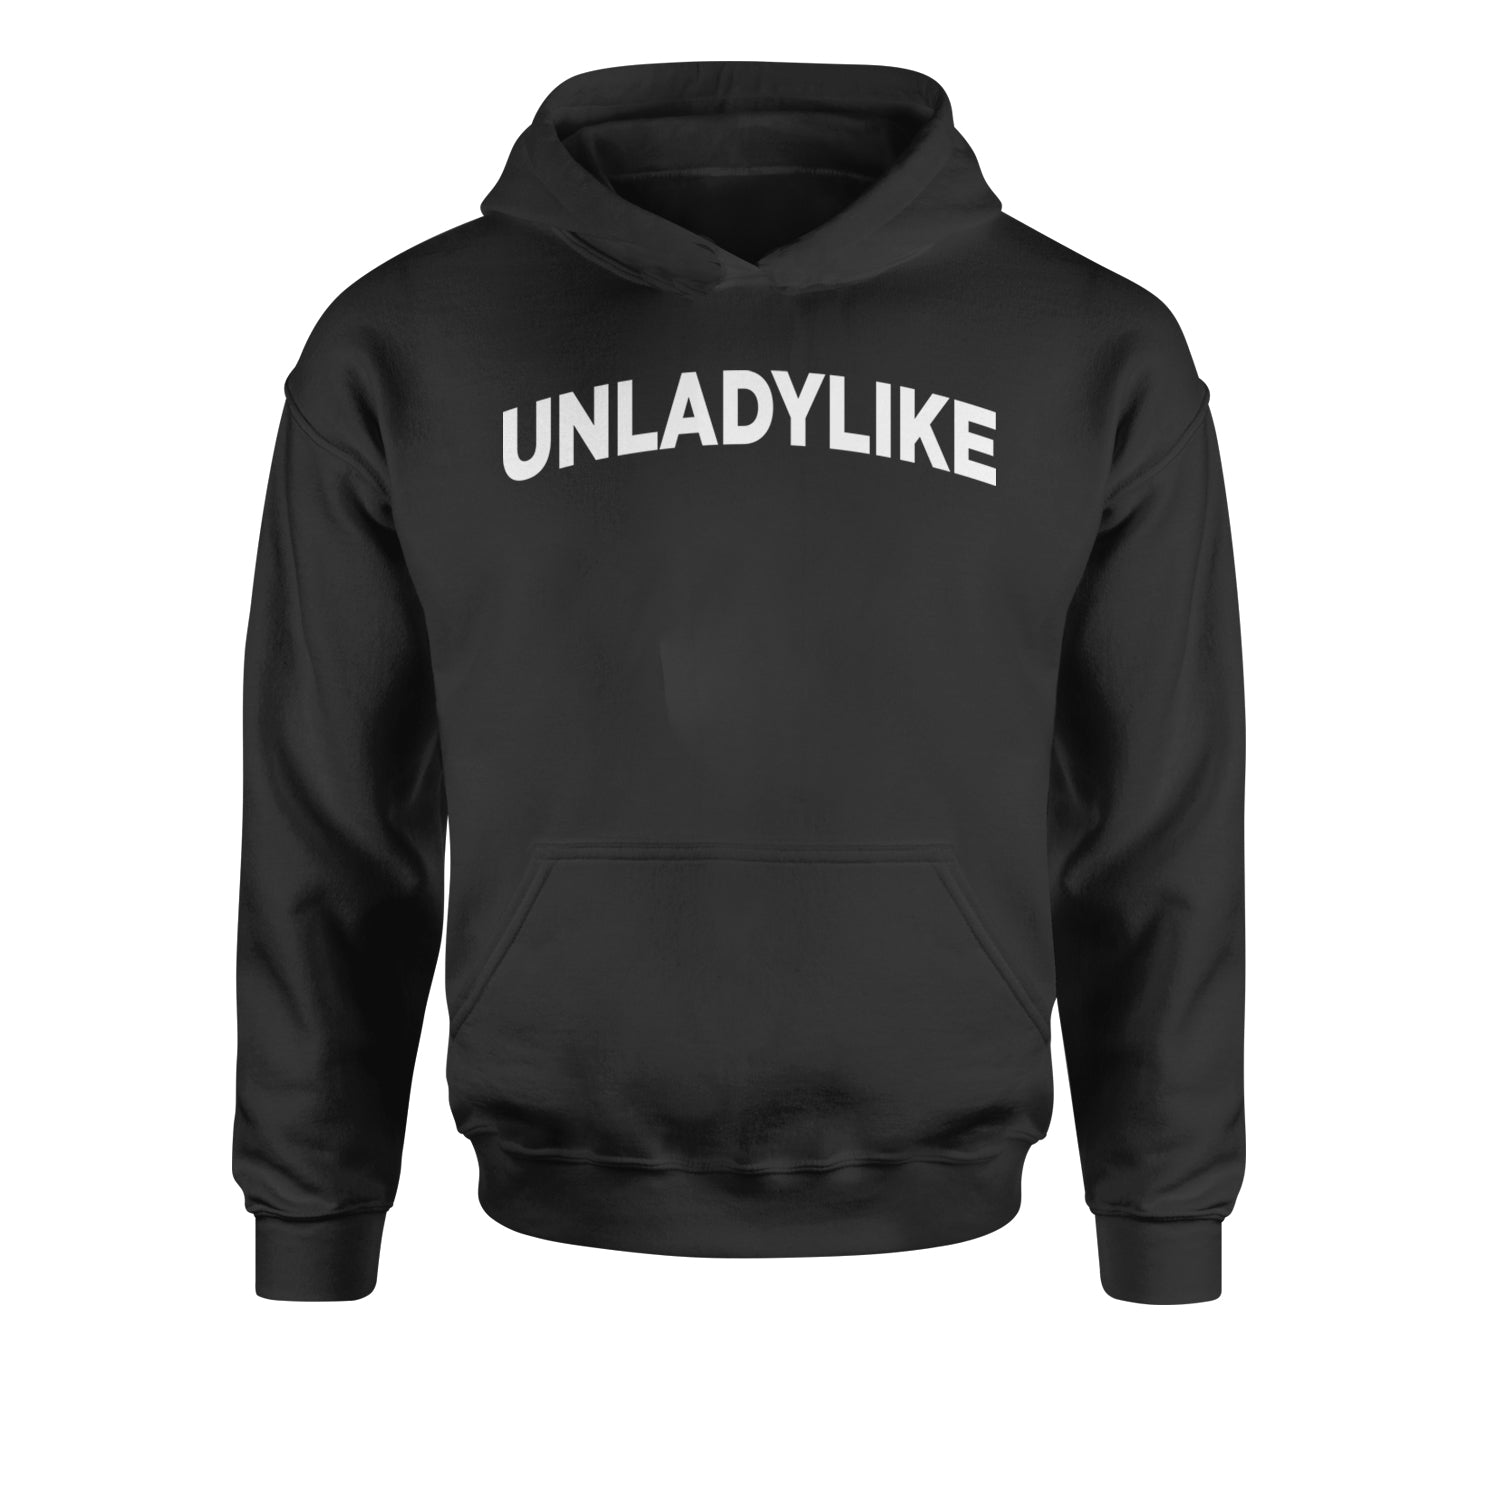 Unladylike Embrace Your Unique Strength Youth-Sized Hoodie